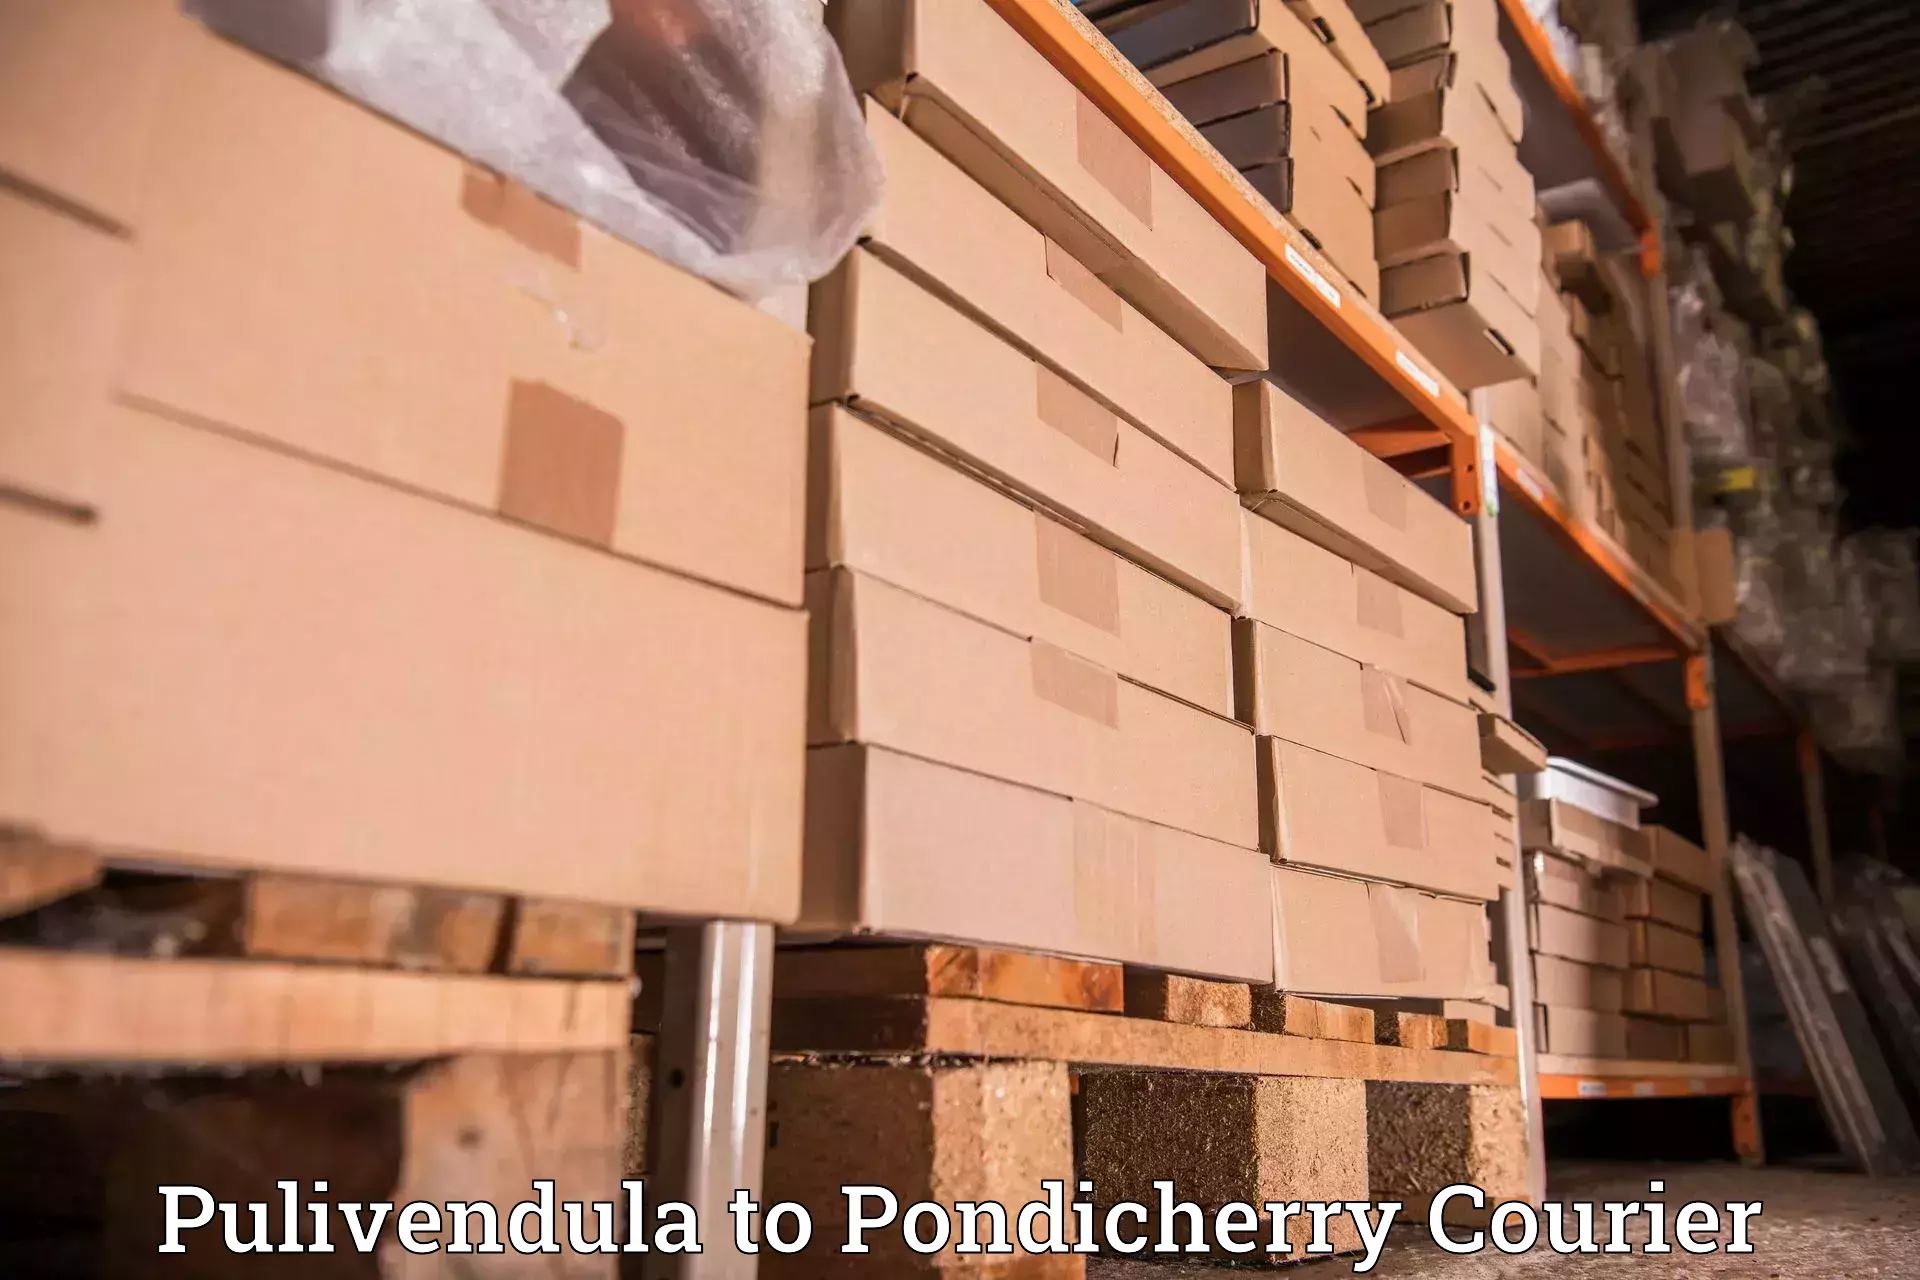 High-priority parcel service Pulivendula to Pondicherry